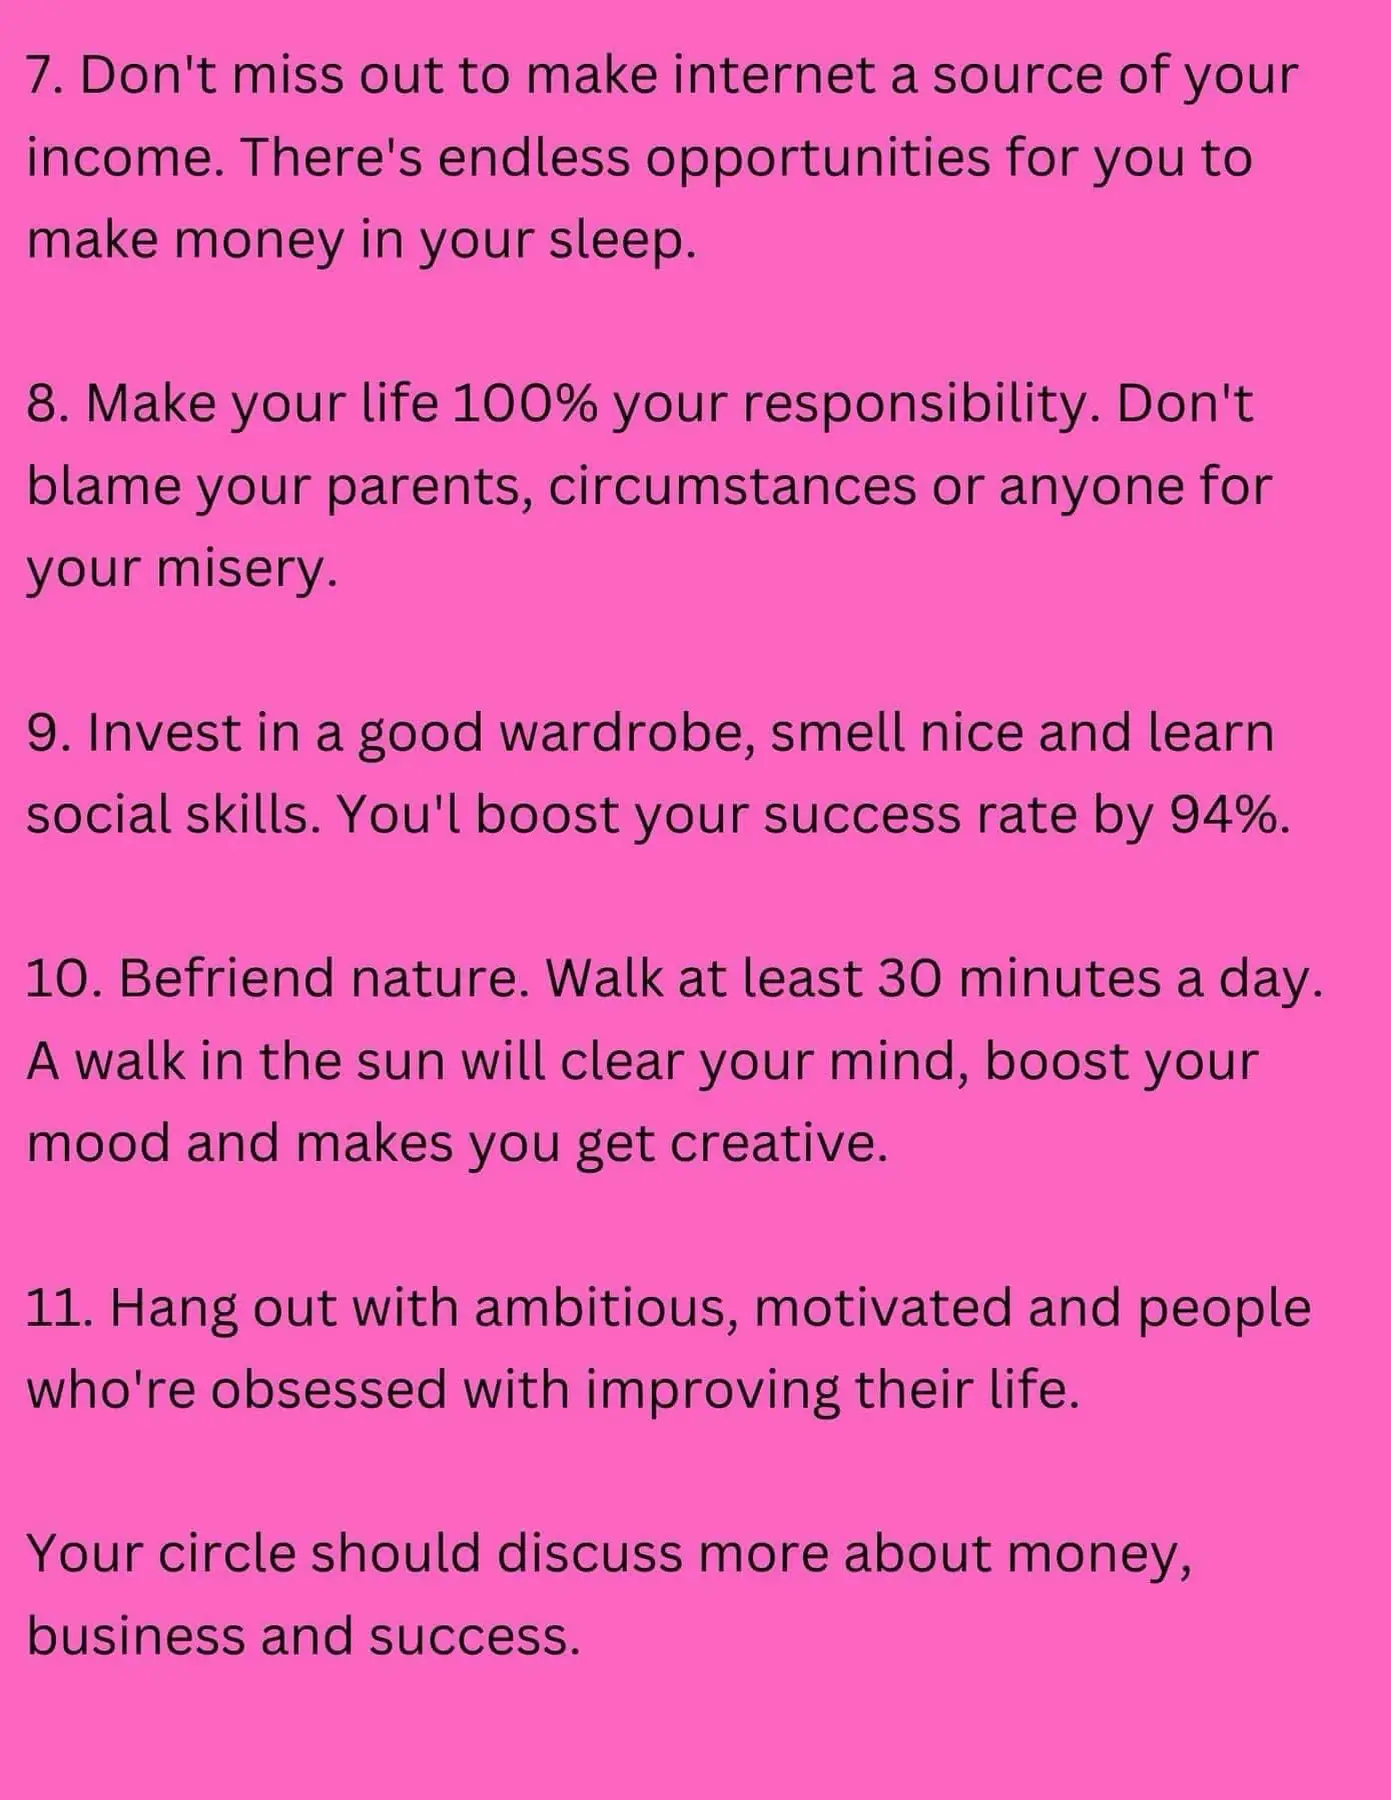  A list of things to do to make your life more successful and successful.